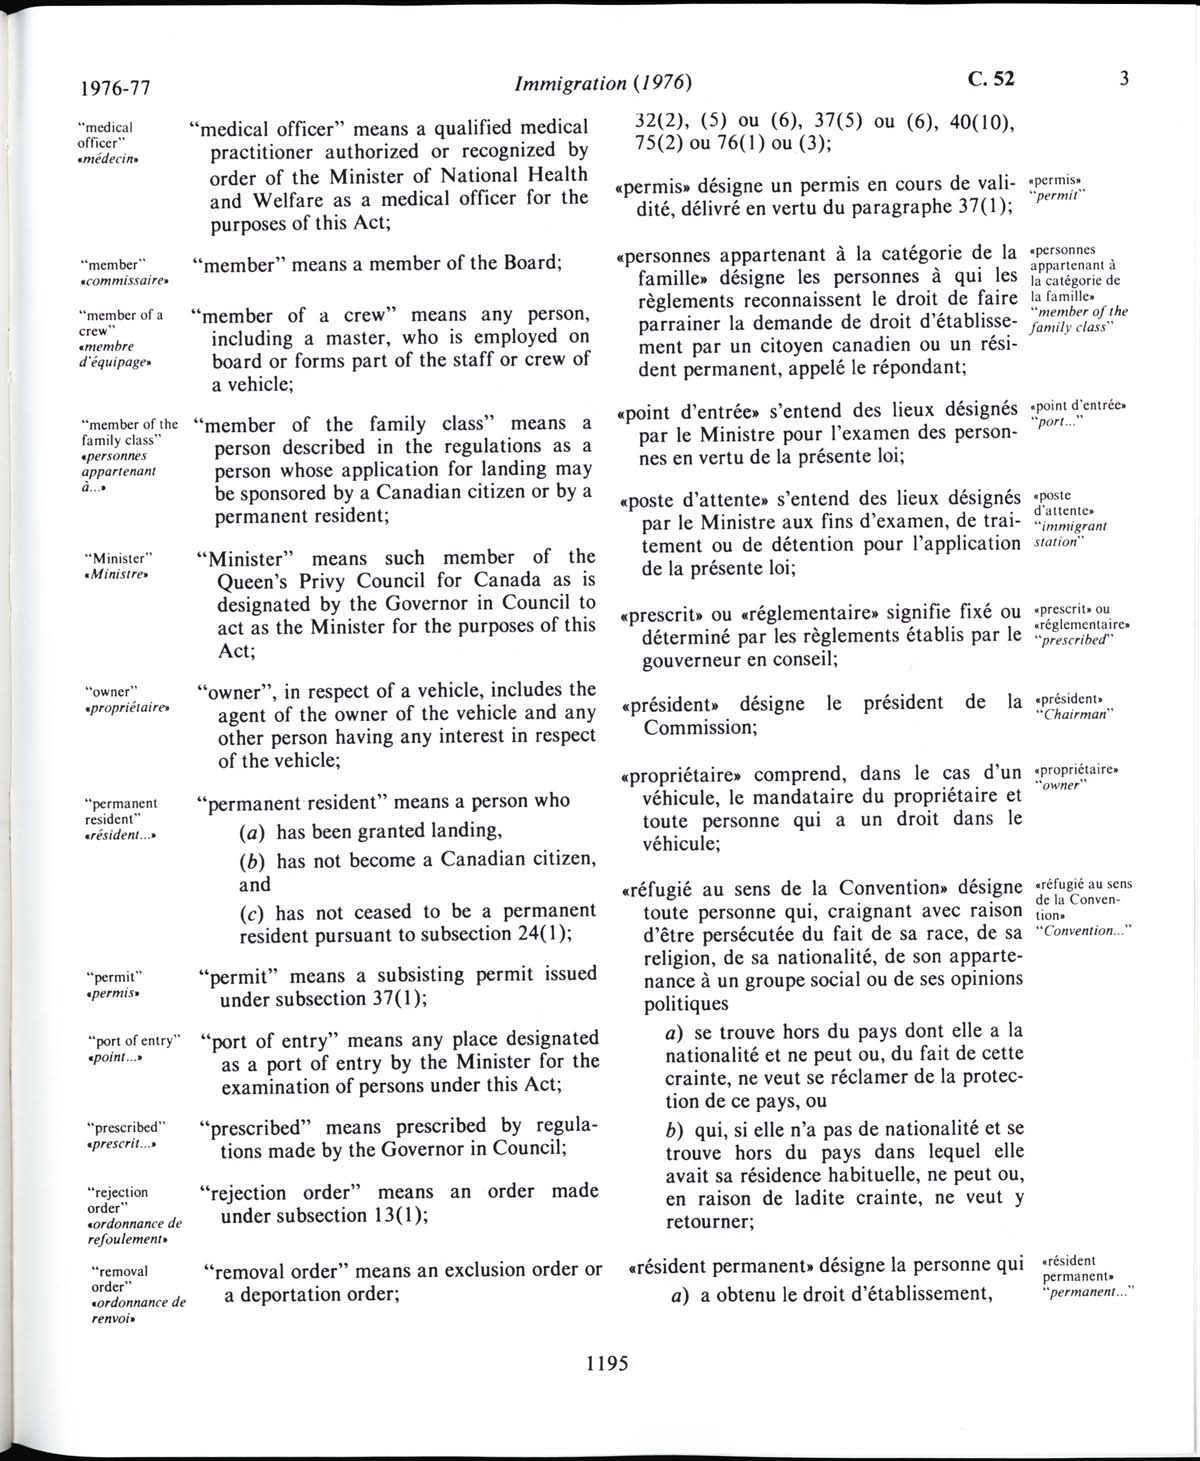 Page 1195 Immigration Act, 1976